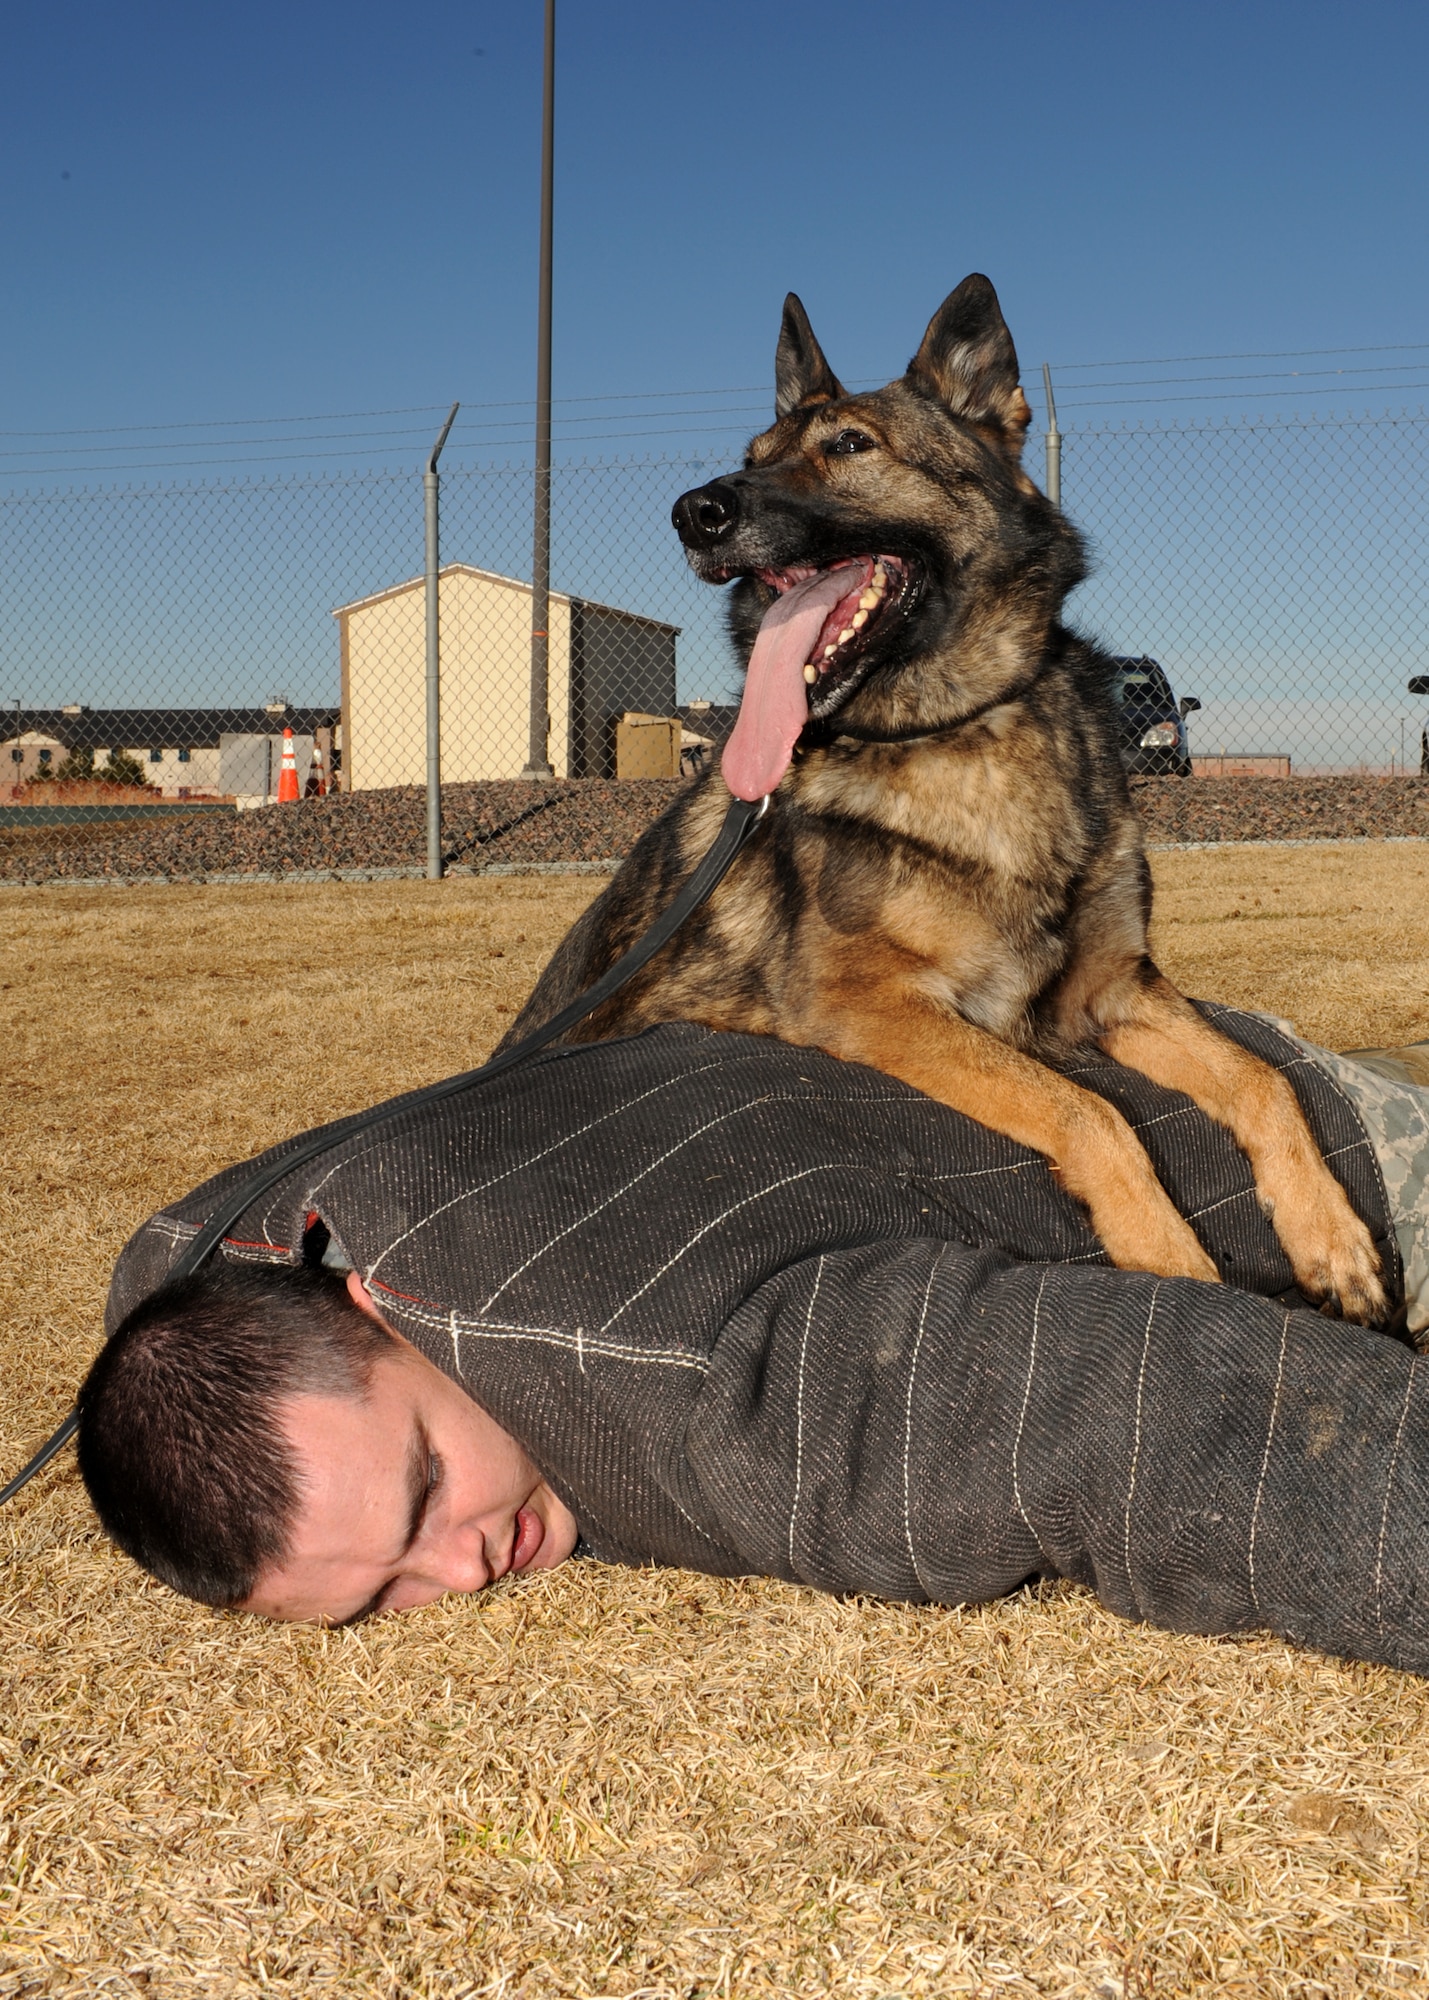 BUCKLEY AIR FORCE BASE, Colo. -- Staff Sgt. Brian Pope, 460th Security Forces military working dog handler, is conquered by Nina Jan 10, 2012. The new 31,000 square-foot kennels and training yard officially open Feb 2, 2012. (U.S. Air Force photo by Senior Airman Marcy Glass)
